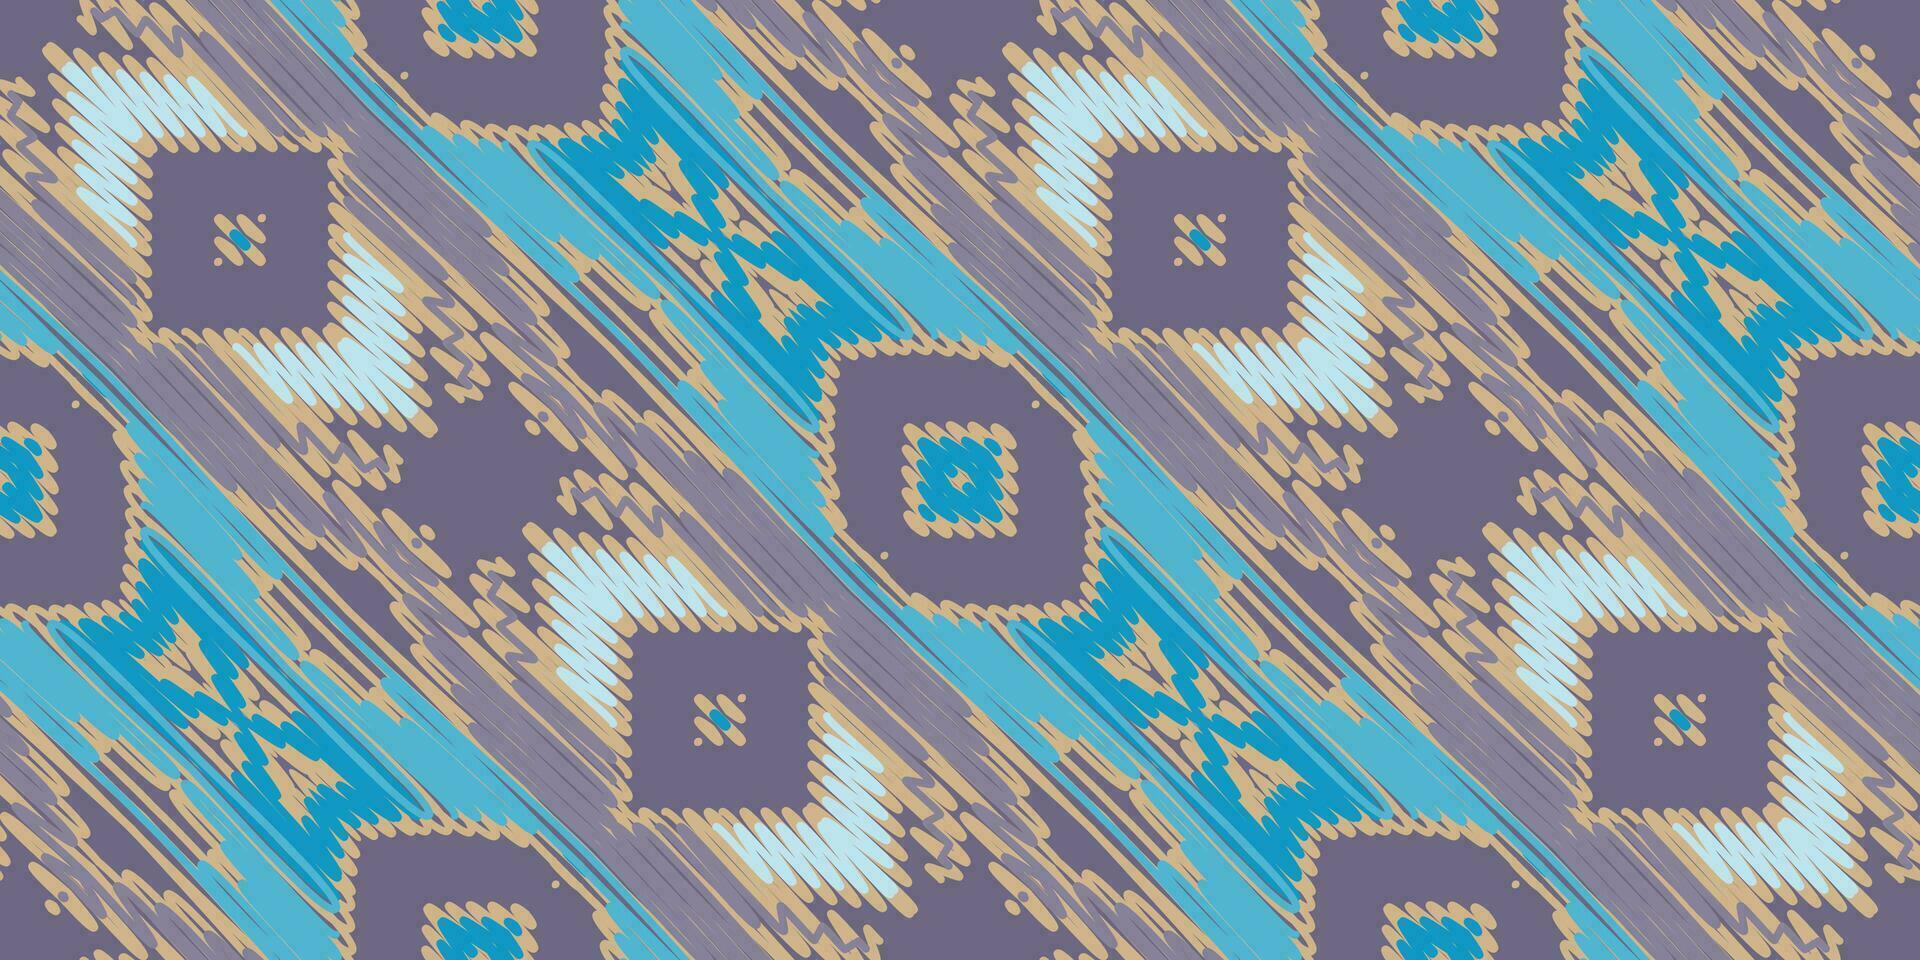 Navajo pattern Seamless Mughal architecture Motif embroidery, Ikat embroidery vector Design for Print tapestry floral kimono repeat pattern lacing spanish motif